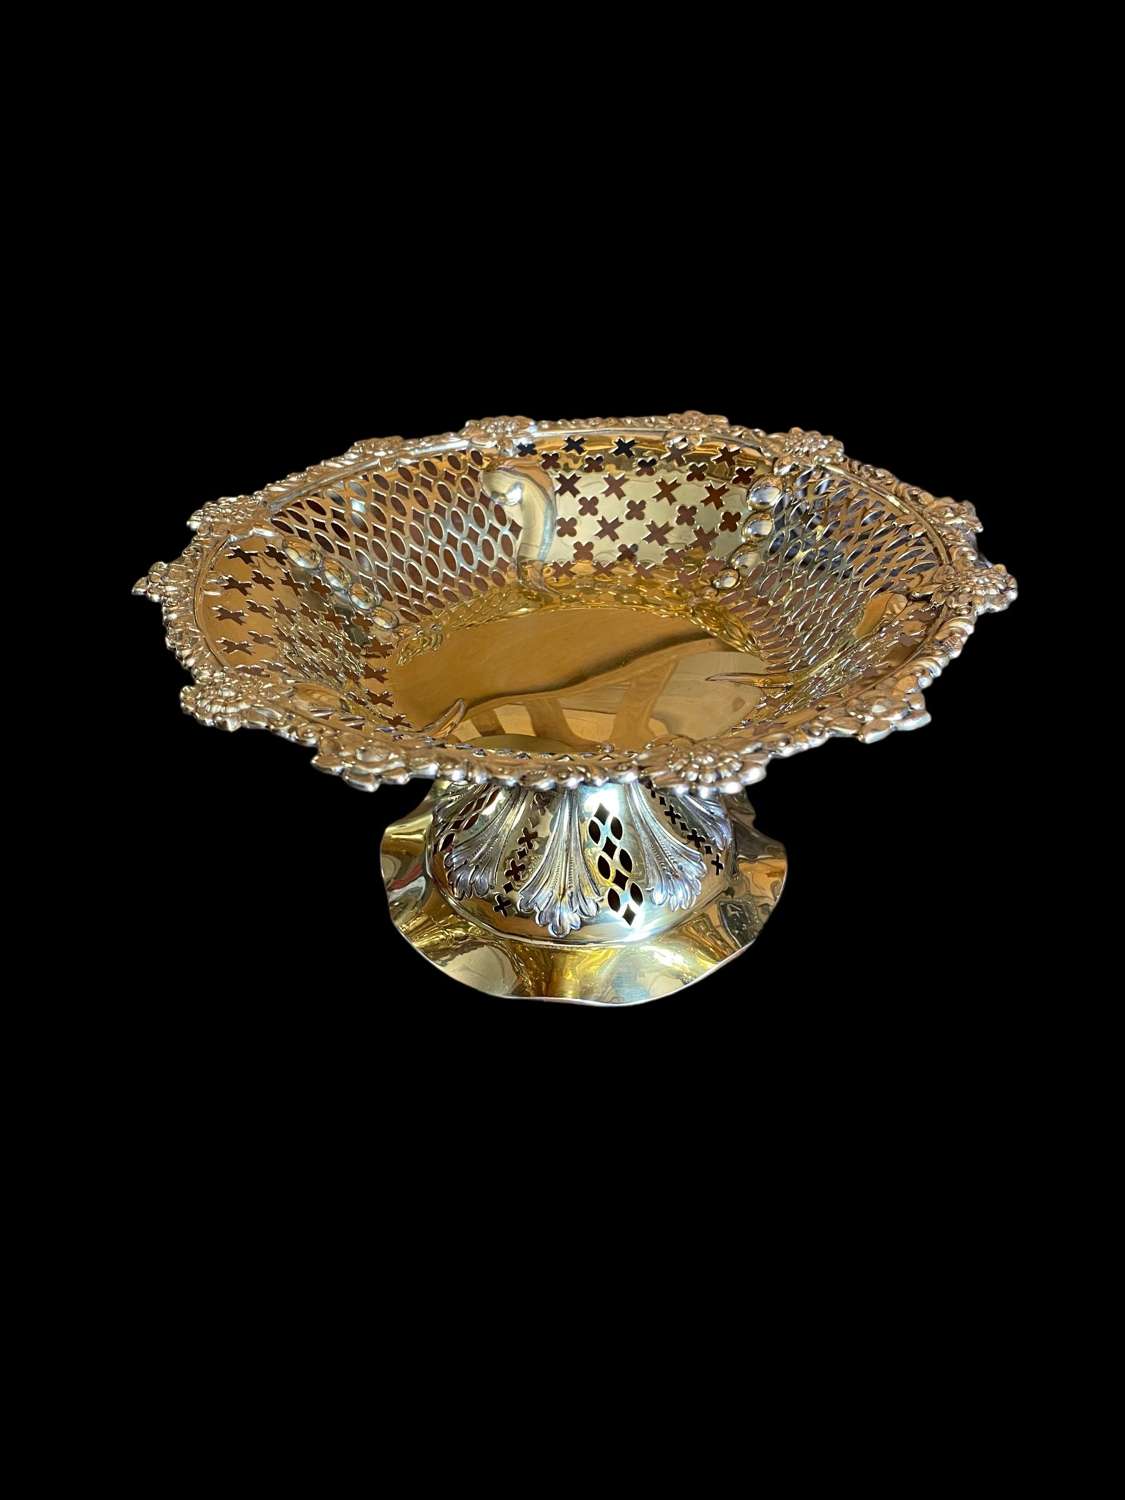 Silver-gilt tazza by Mappin and Webb 1895